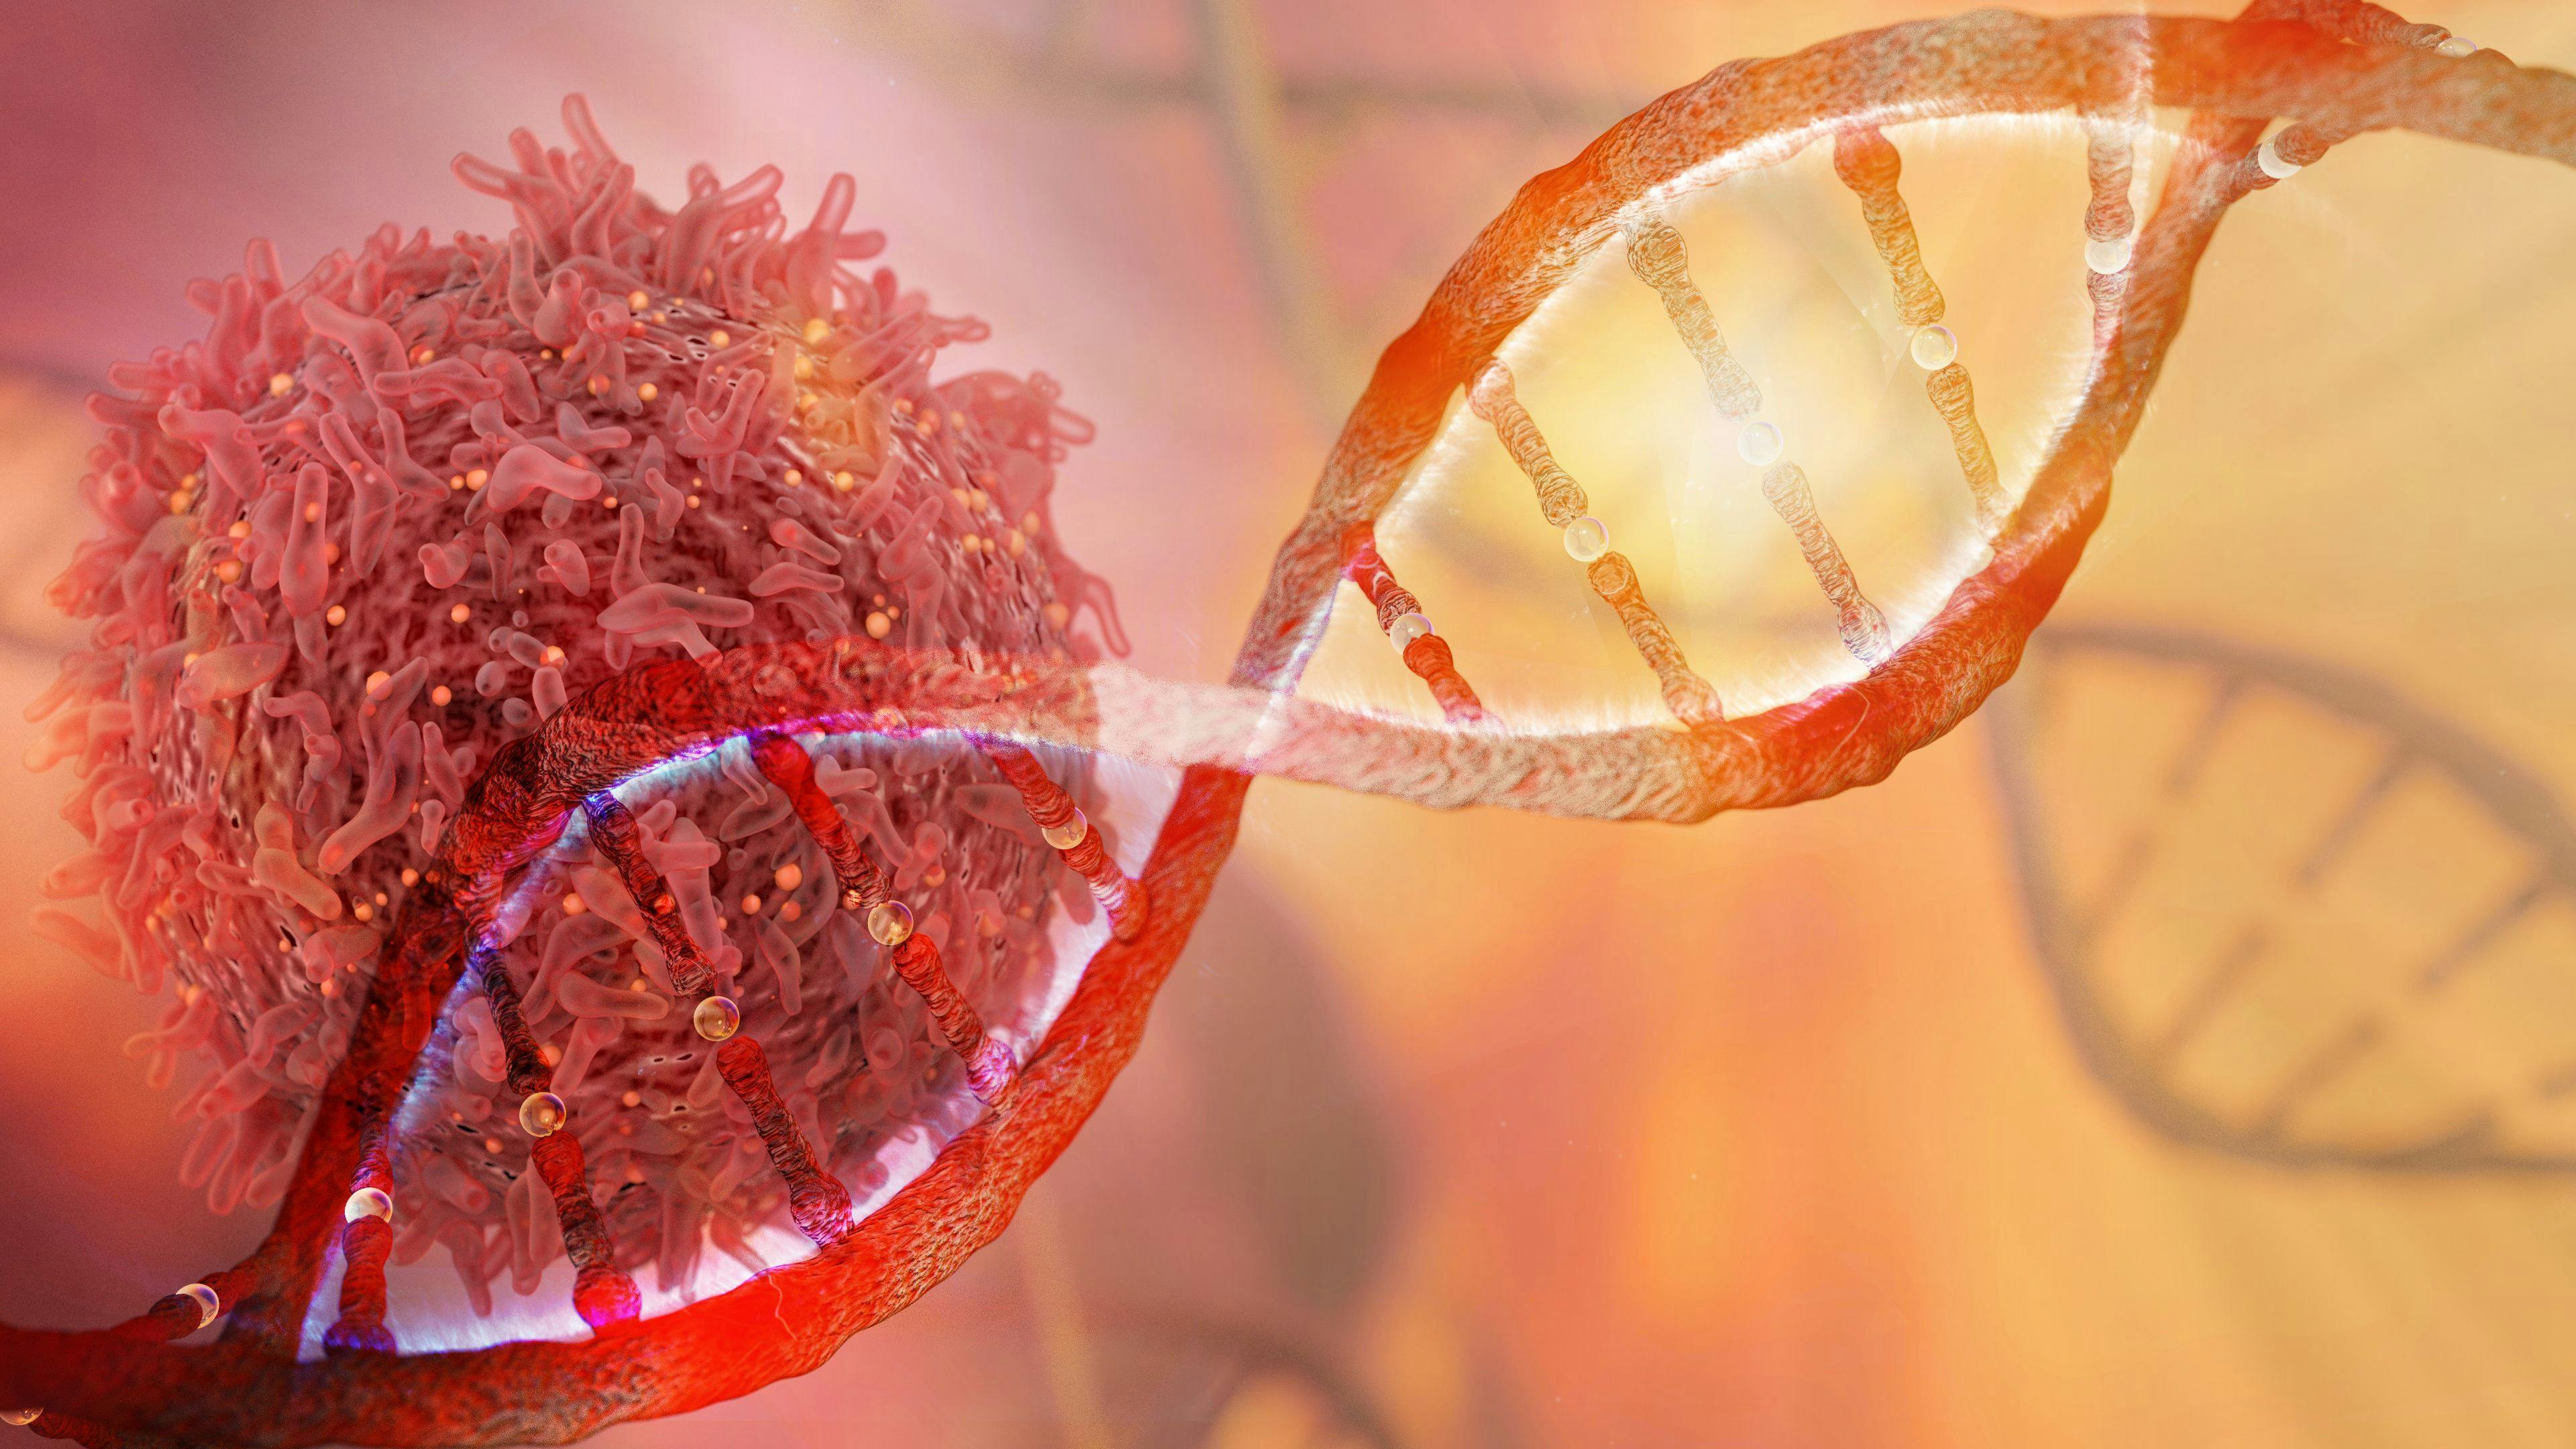 Expert: Circulating Tumor DNA Is A “Hidden Link” to Monitor Colorectal, Other Cancers